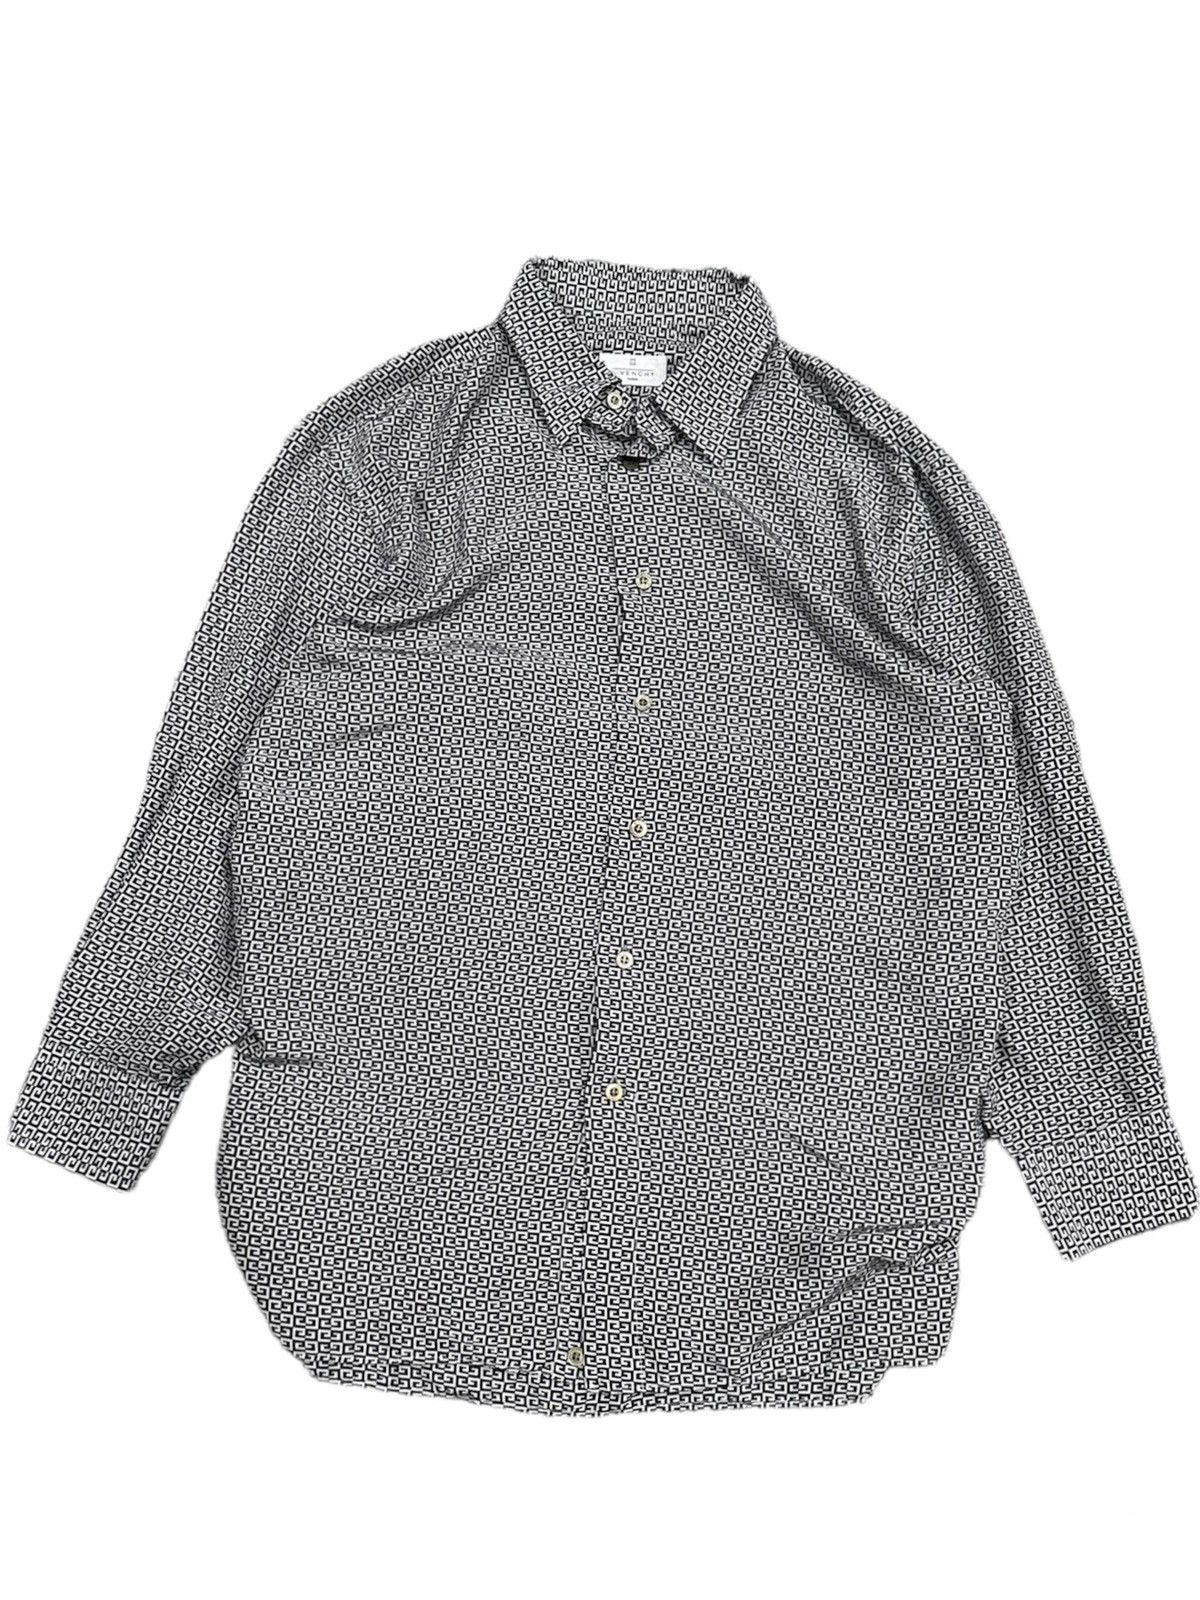 Givenchy Made in Italy Monogram Silk Button Shirt - 2